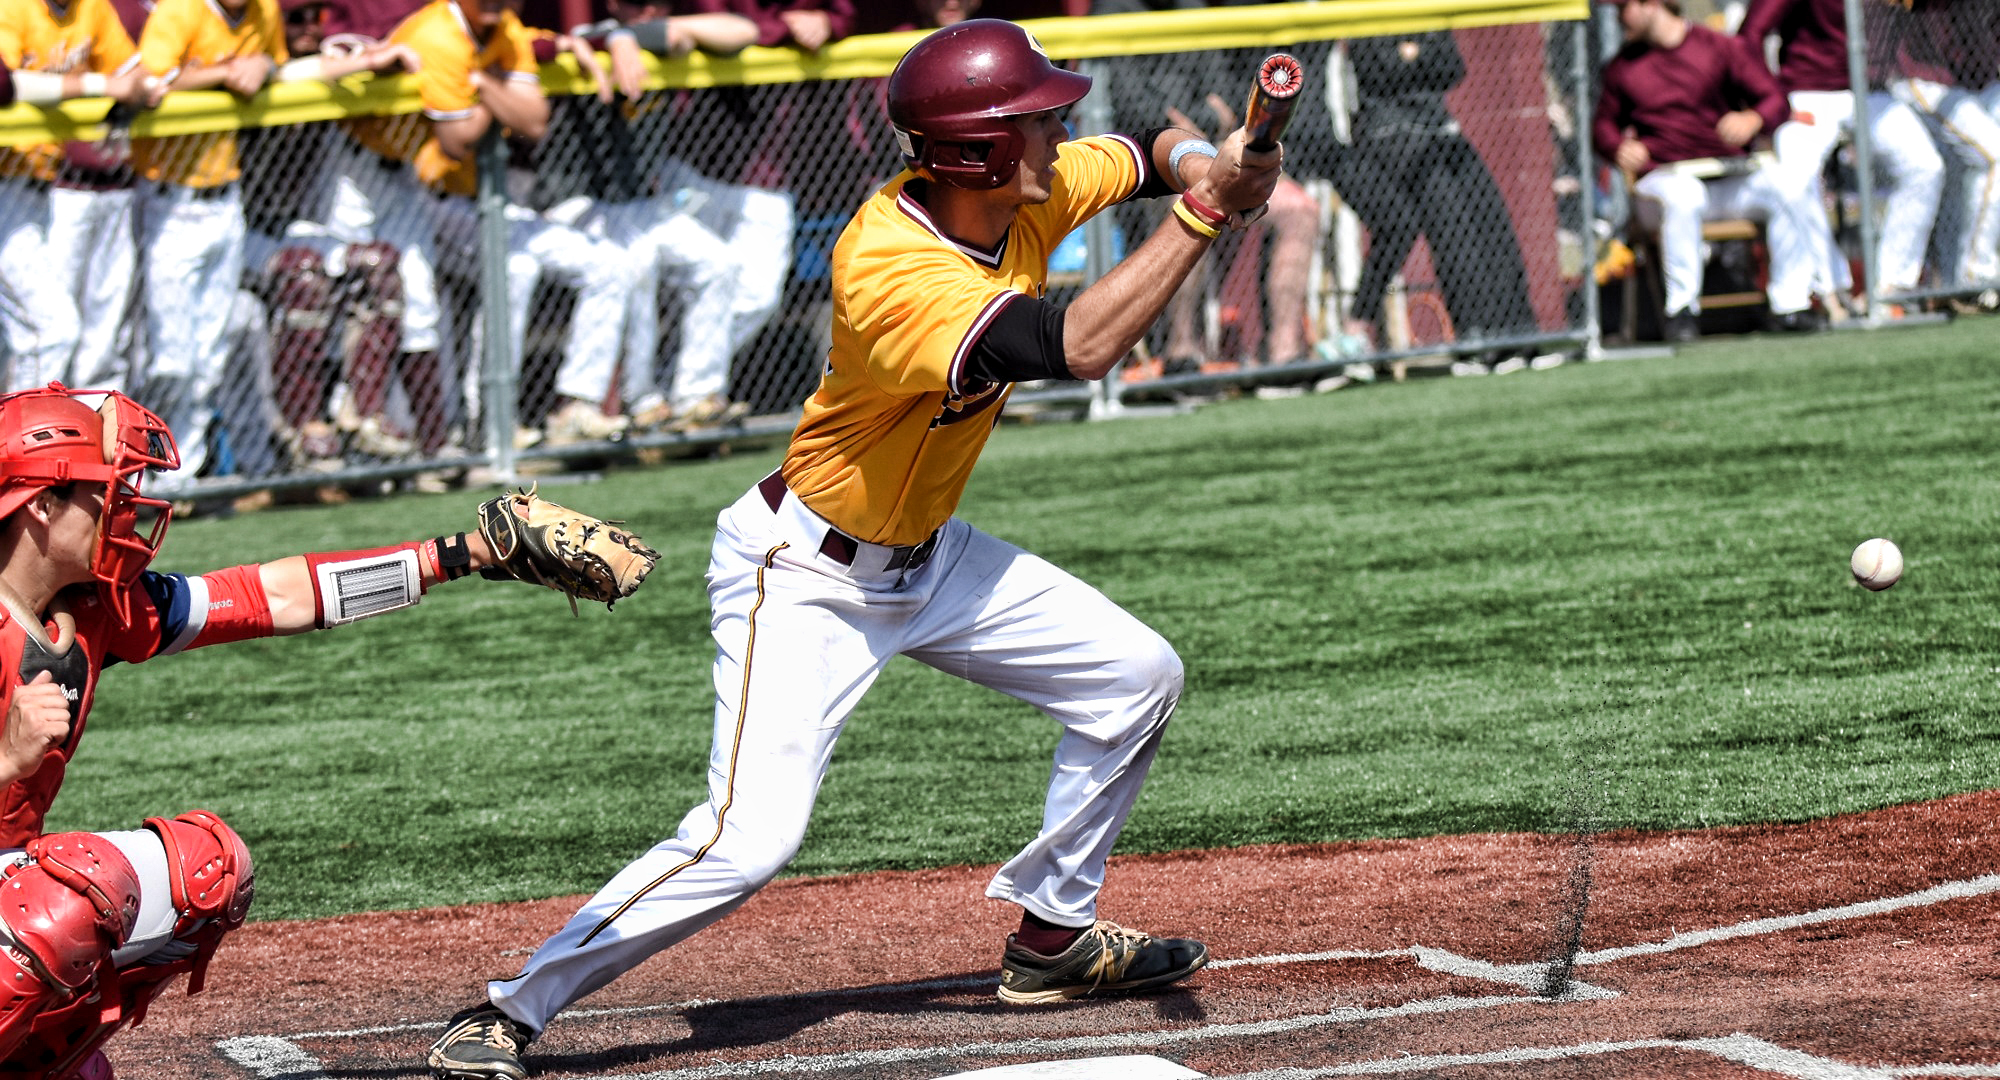 Nate Sillerud lays down a sacrifice bunt in the second inning of Game 2 against St. Mary's.